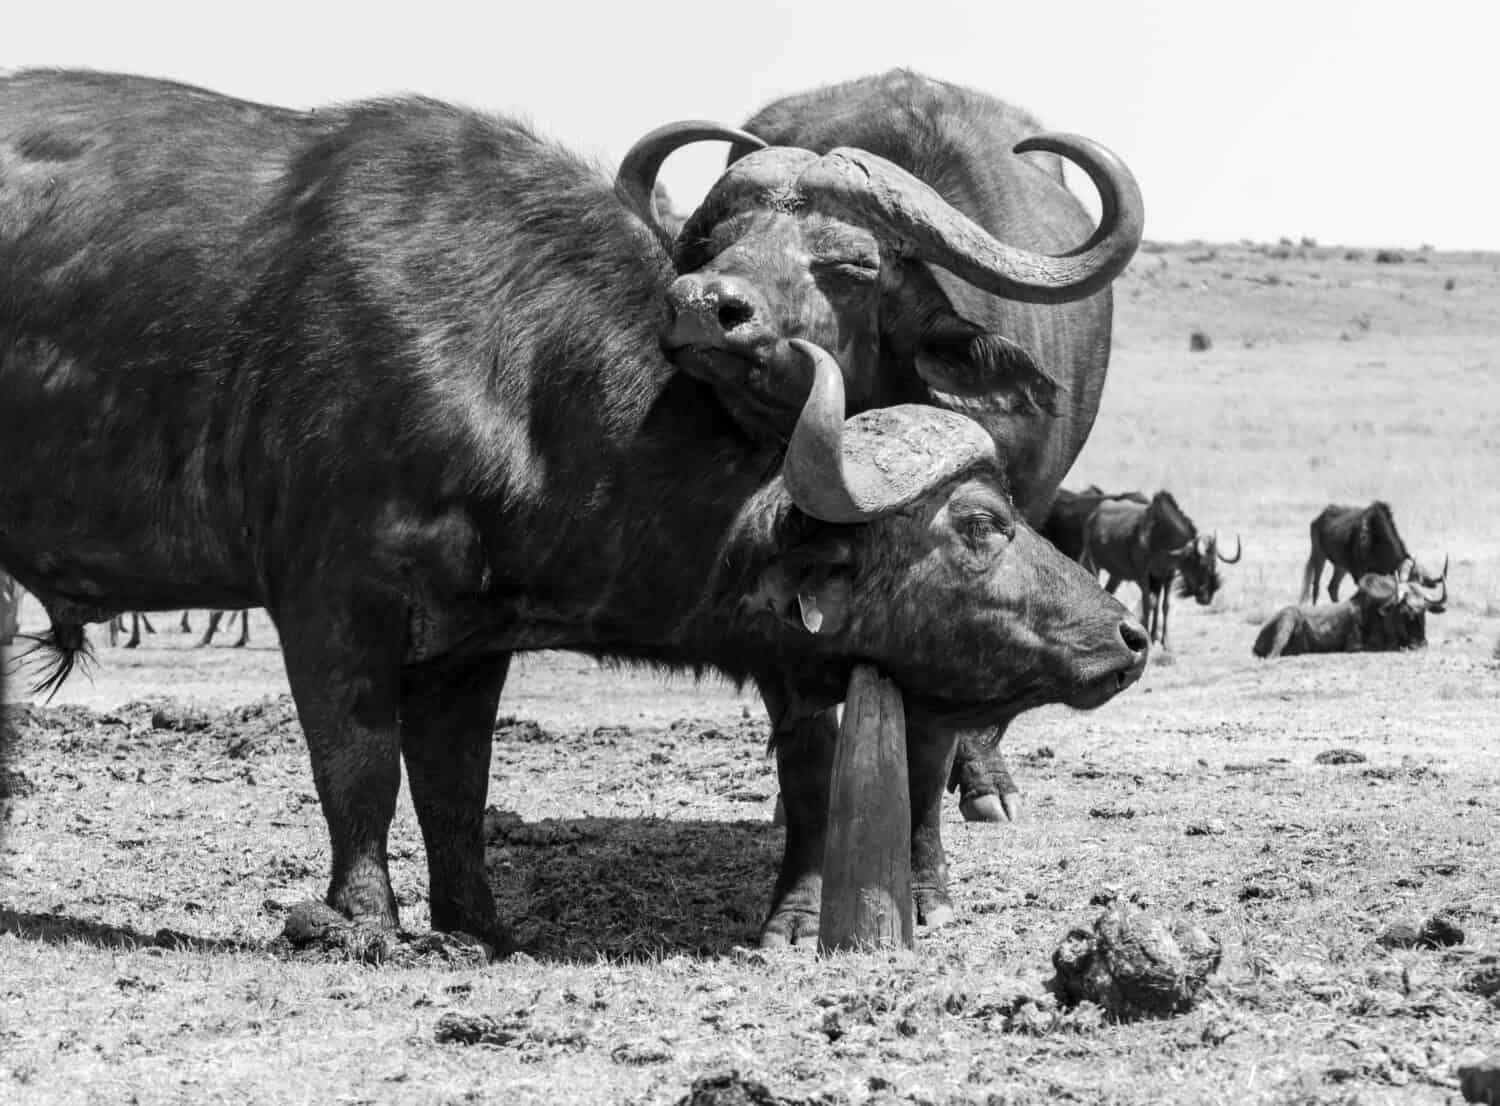 Two Cape Buffalo together while one rubs its neck against a wooden pole